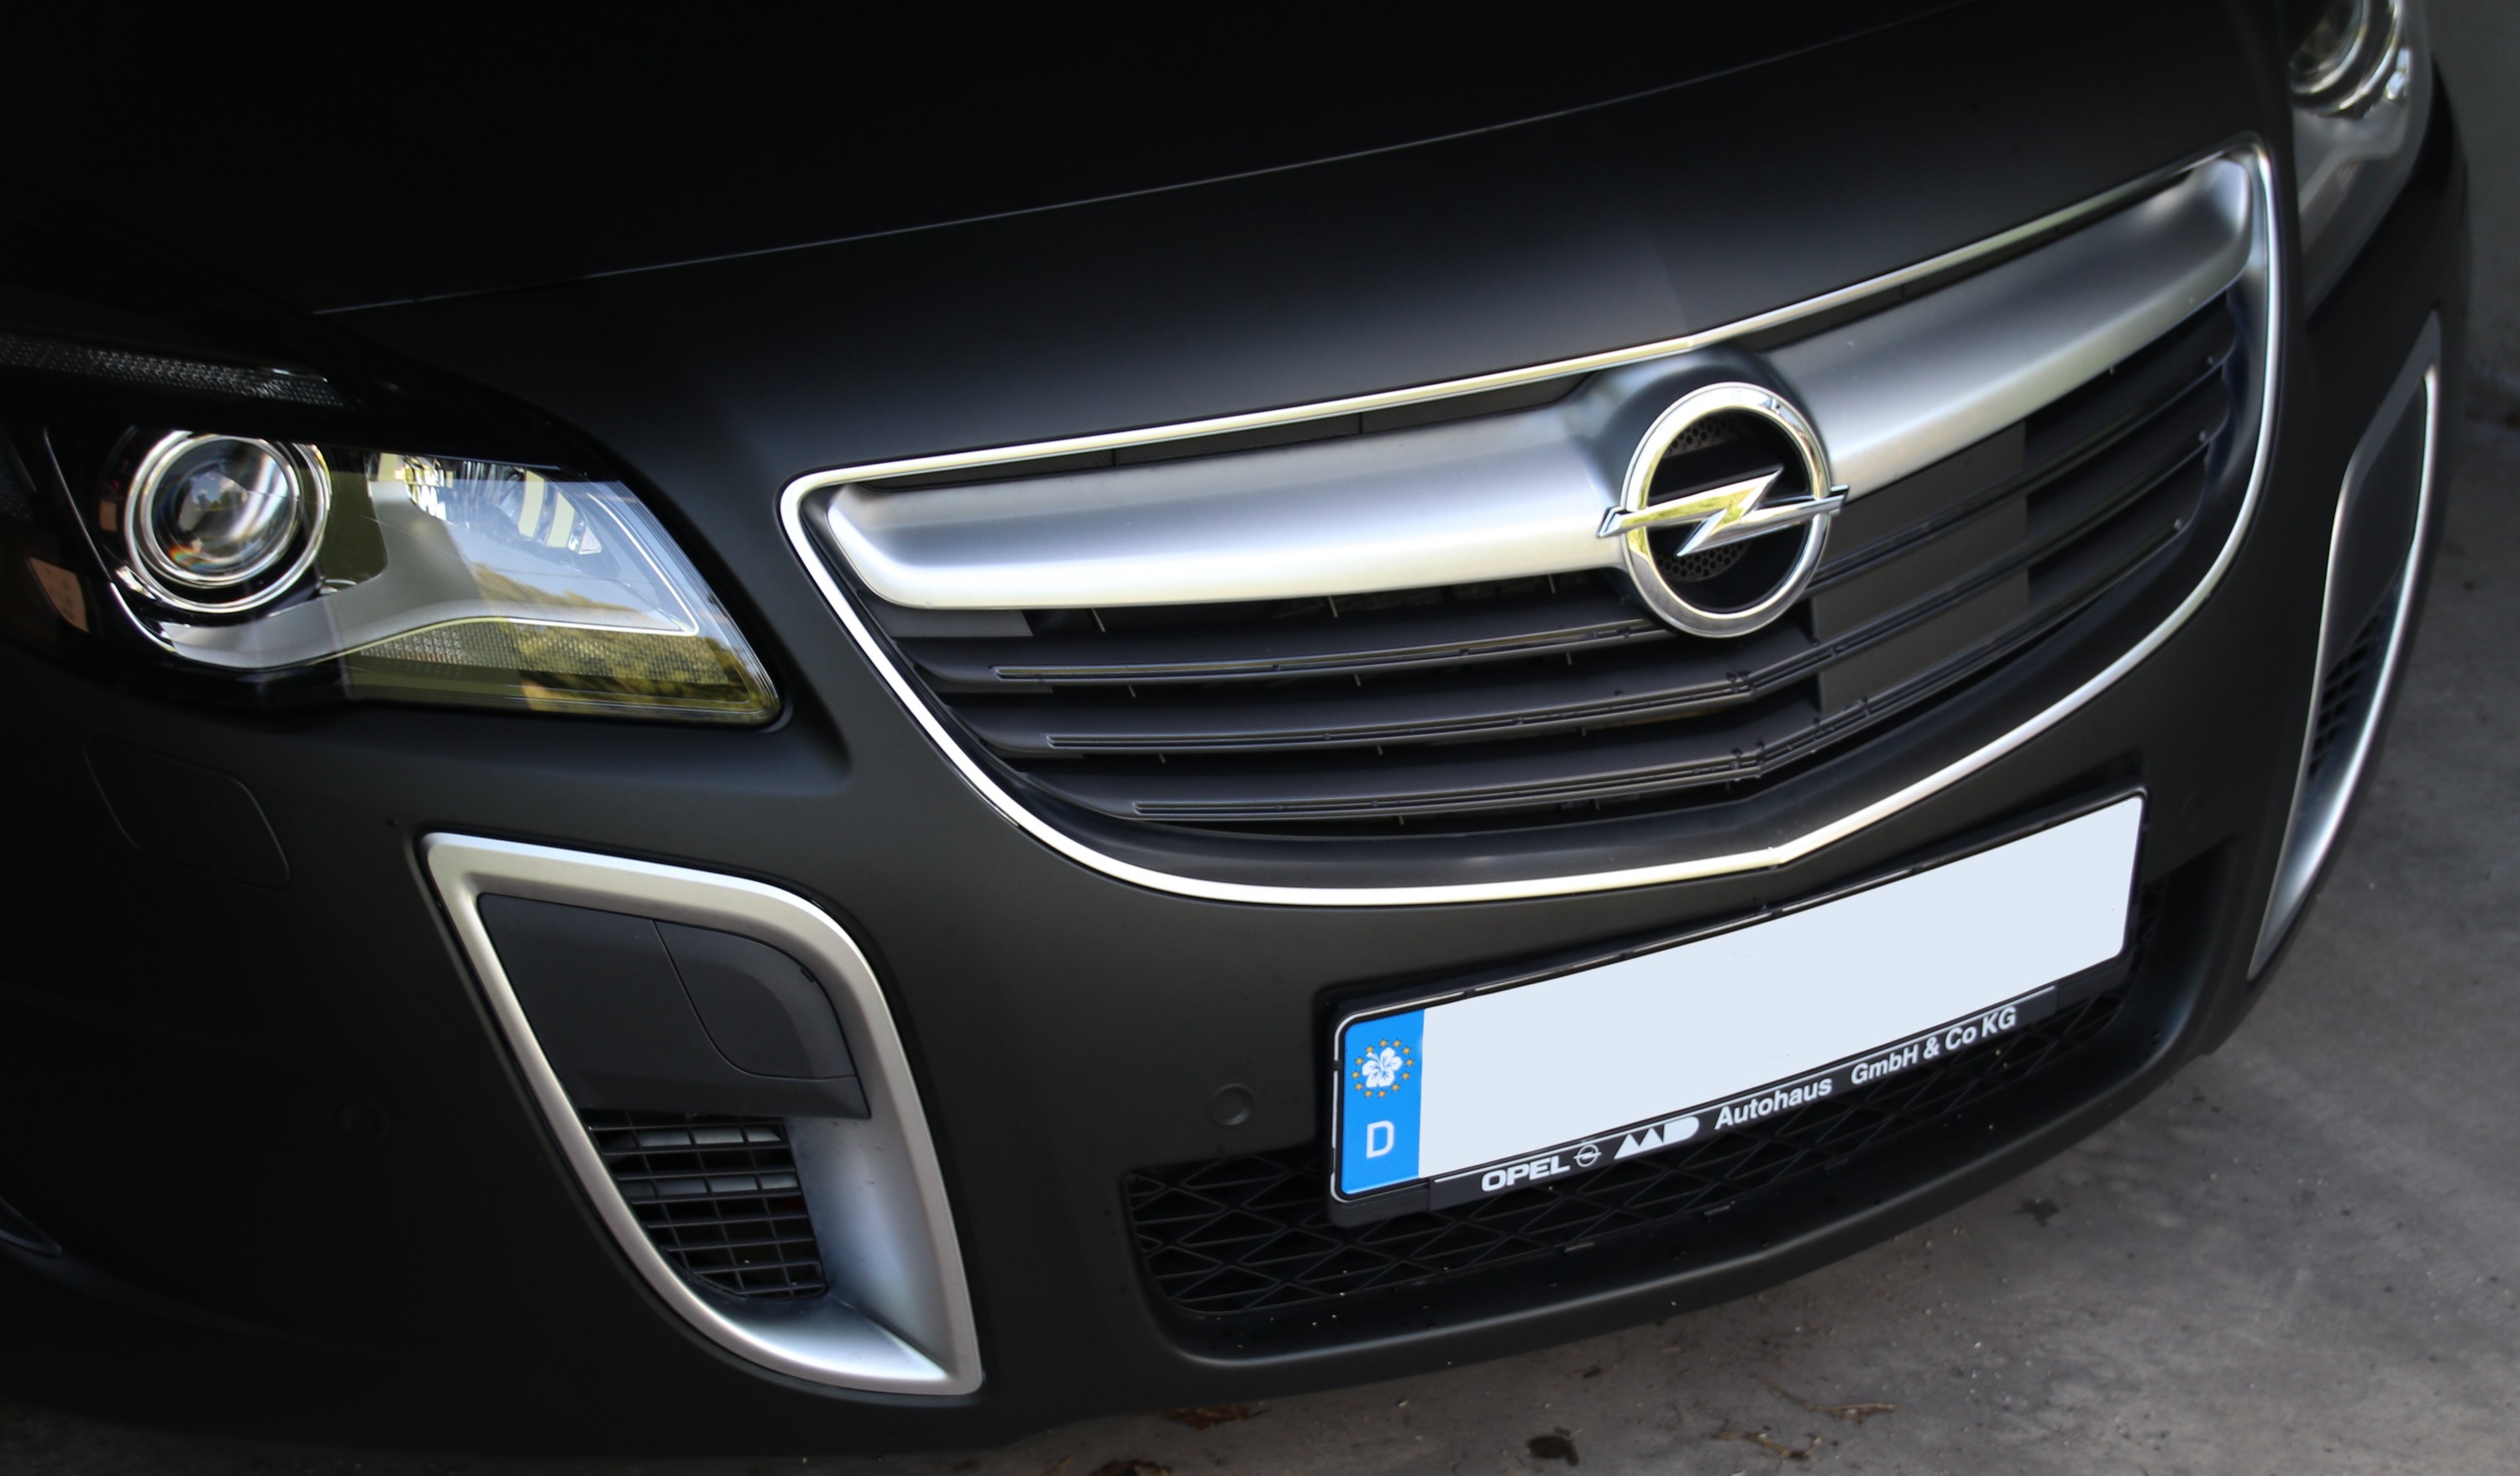 Grill OPC nach Facelift